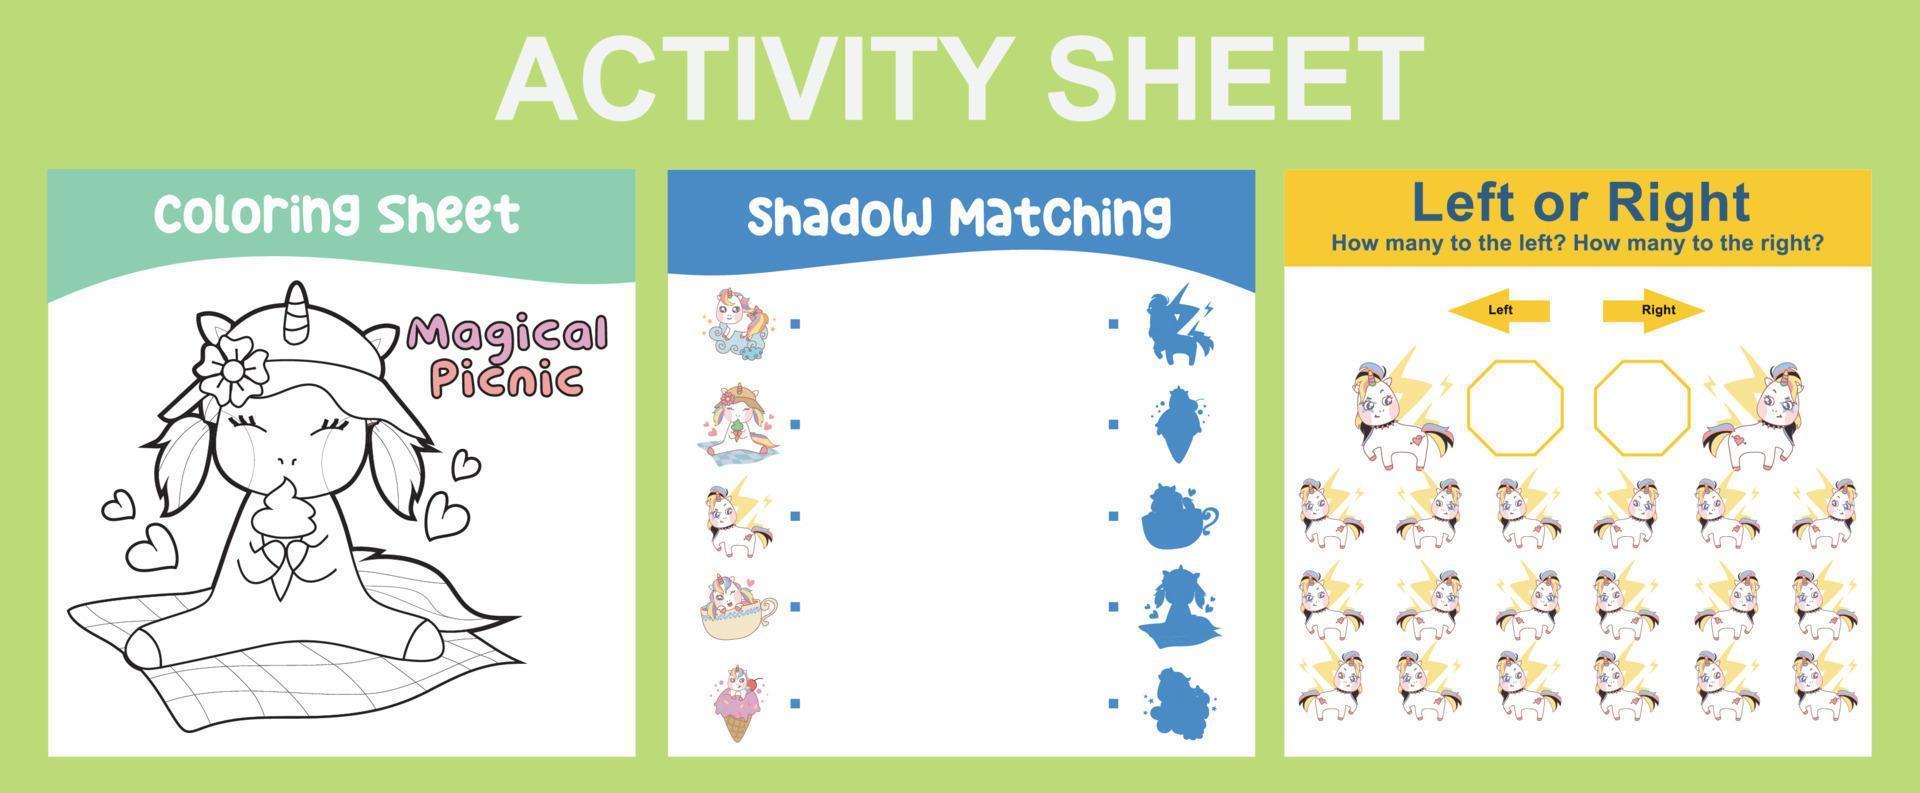 3 in 1 Activity Sheet for children. Educational printable worksheet for preschool. Coloring, shadow matching, left or right activity. Vector illustrations.